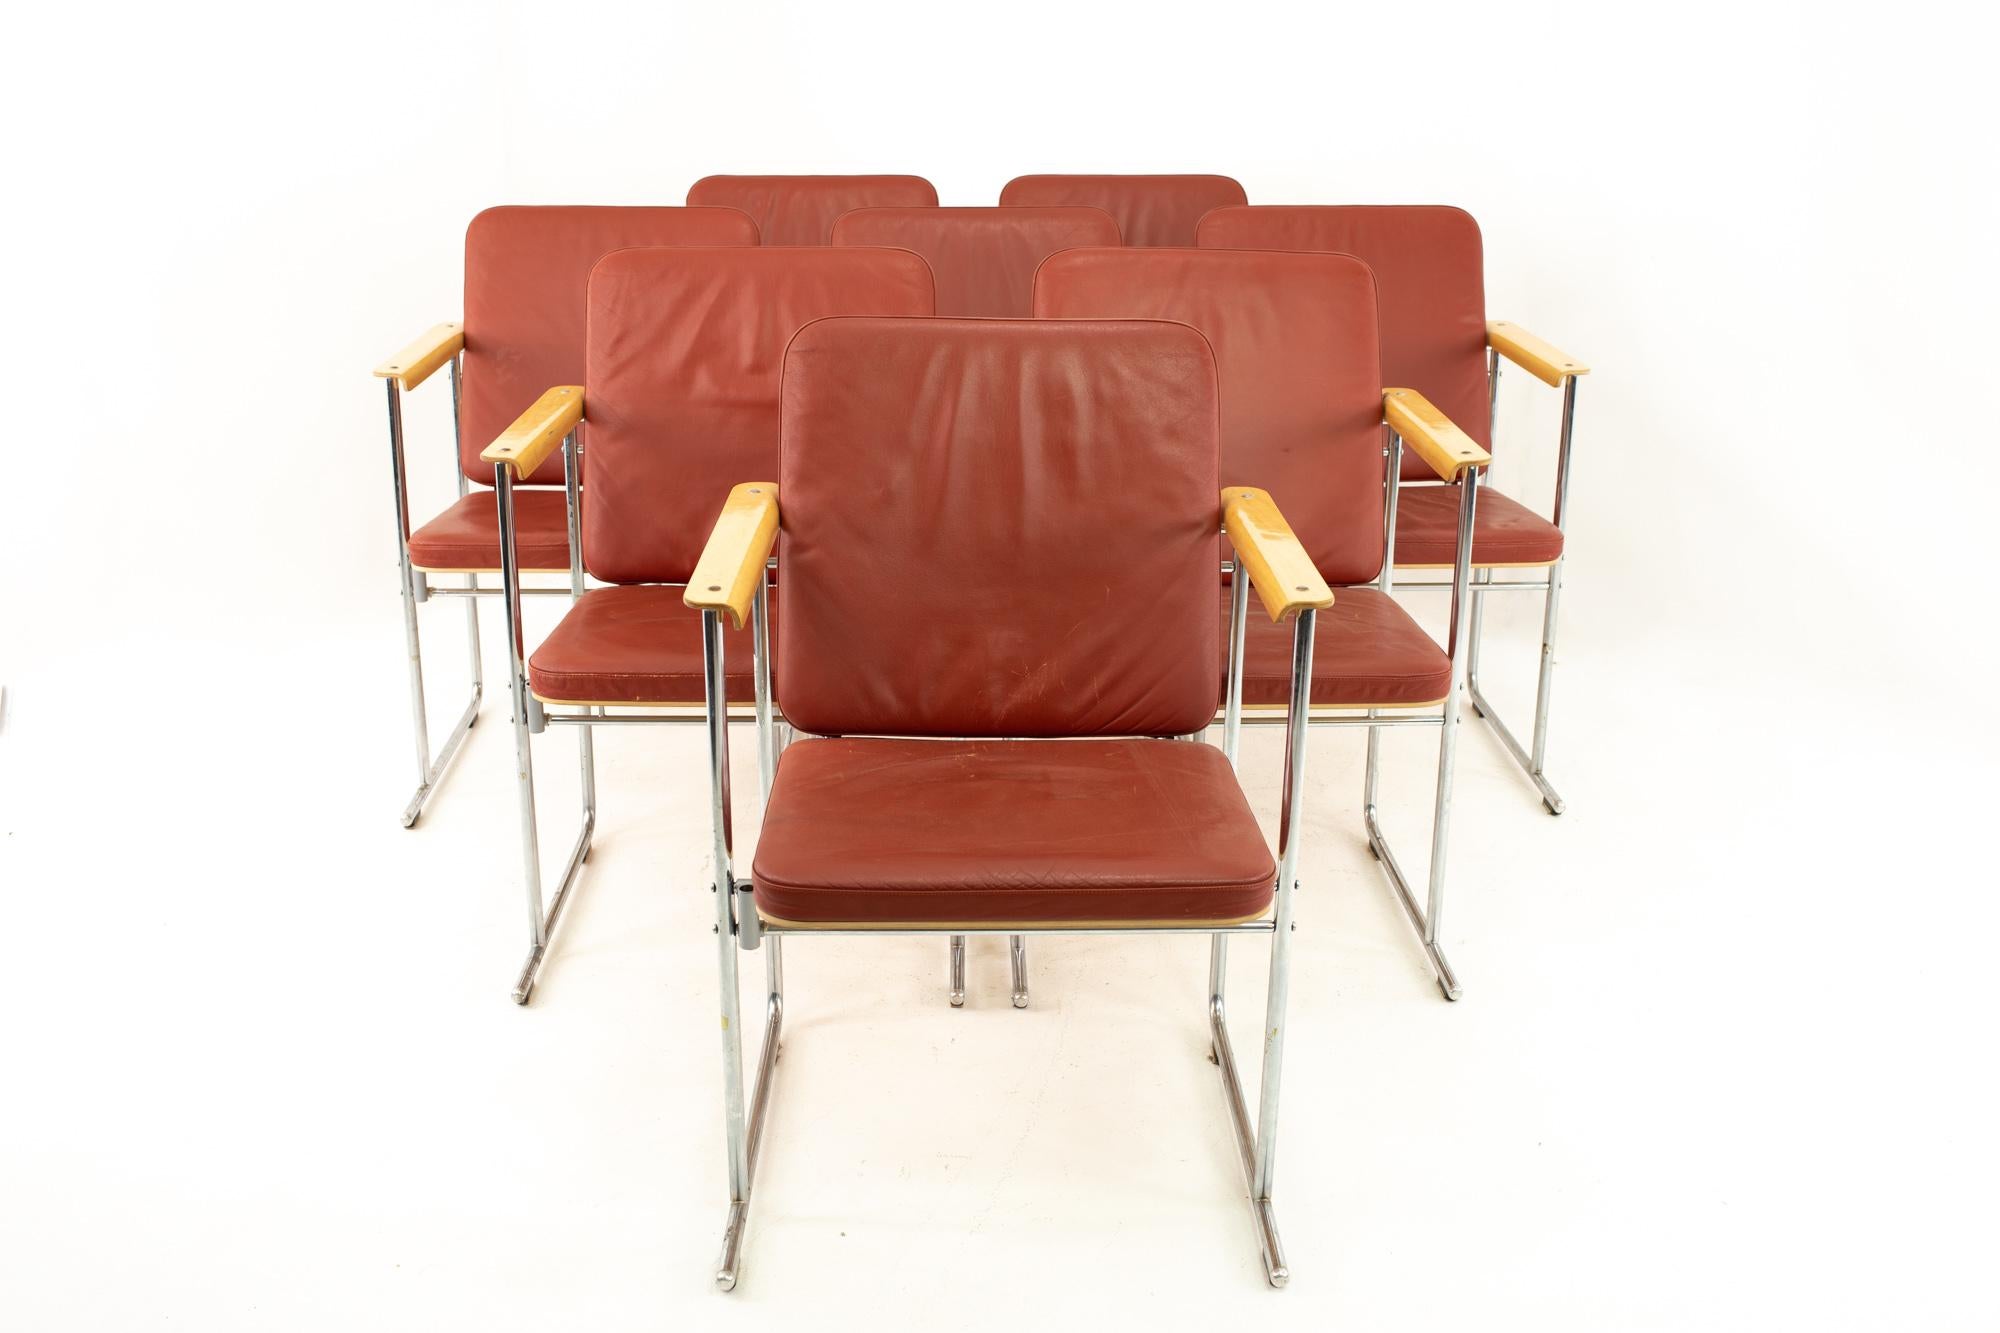 Yjro Kukkapuro midcentury dining chairs, set of 8

Each chair measures: 24 wide x 25 deep x 34 high with a seat height of 18 inches 

This price includes getting this set in what we call restored vintage condition. Upon purchase it is fixed so